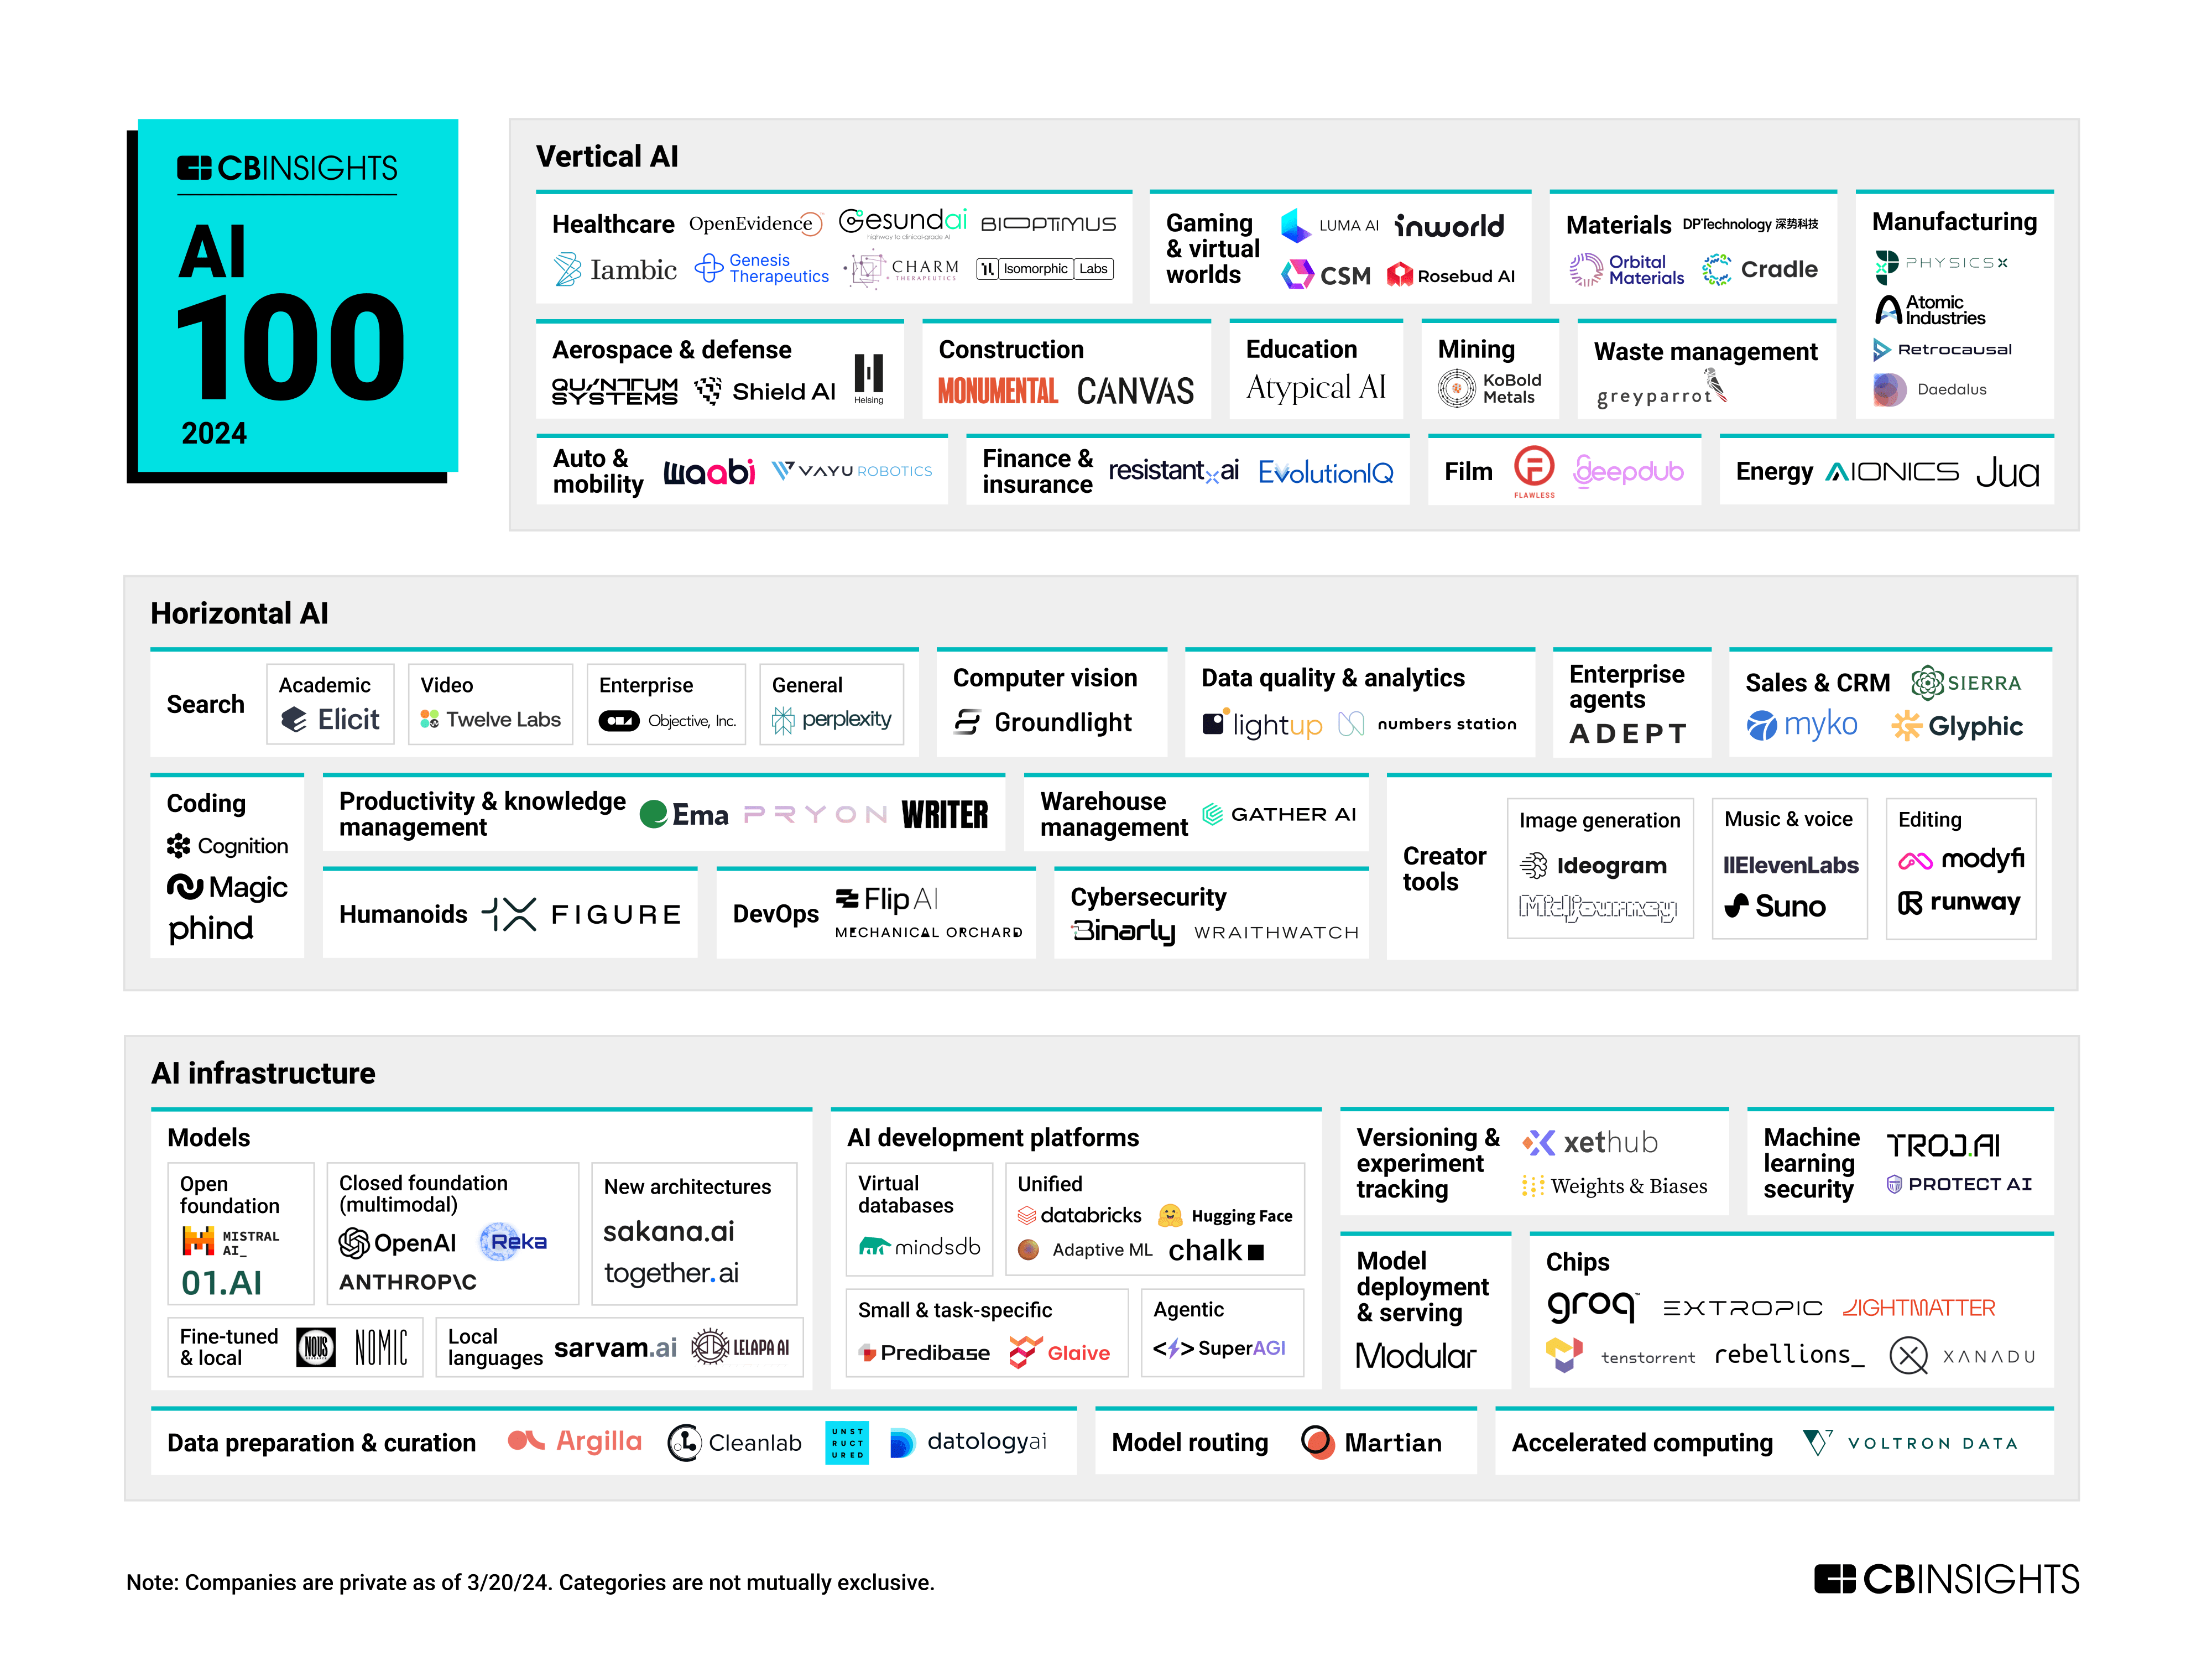  An infographic by CB Insights titled 'AI 100 2024', showcasing a categorized list of 100 artificial intelligence companies to watch in 2024. The companies are divided into three main categories: Vertical AI, Horizontal AI, and AI Infrastructure. Vertical AI includes industries like Healthcare, Aerospace & Defense, Auto & Mobility, Gaming & Virtual Worlds, Education, Waste Management, and more. Horizontal AI covers general areas such as Search, Coding, Humanoids, Data Quality & Analytics, and various AI applications. AI Infrastructure is divided into Models, AI Development Platforms, Data Preparation & Curation, and other foundational technologies. Each company logo is listed under its respective sub-category. Notable entries include OpenAI, Anthropic, and other industry-specific AI companies. A footnote states that the companies are private as of 3/20/24 and the categories are not mutually exclusive.